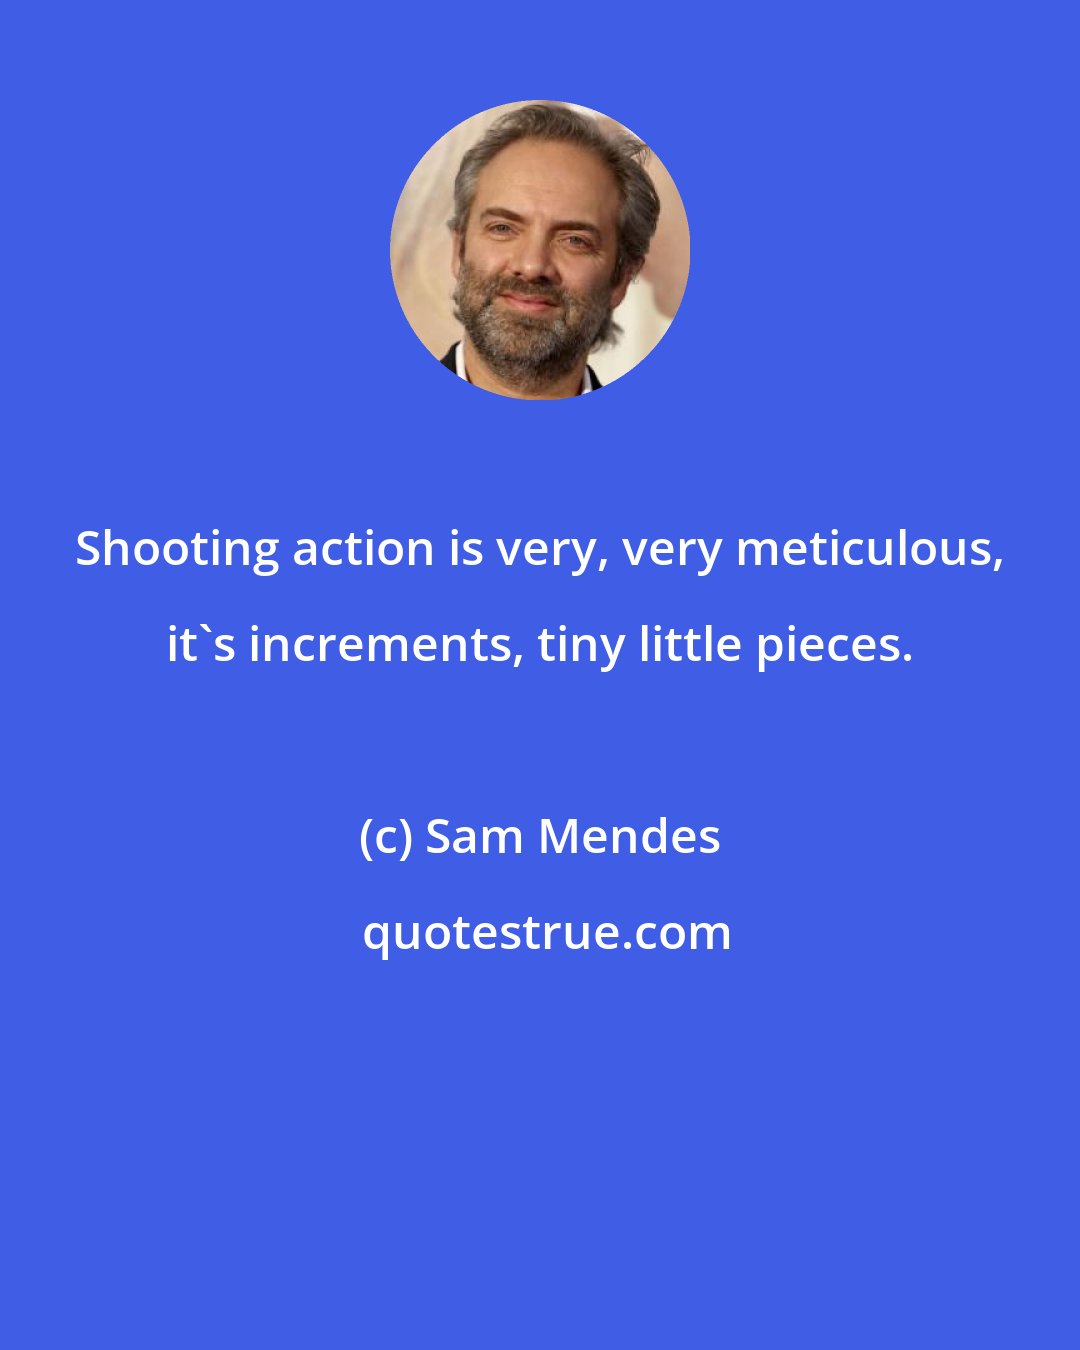 Sam Mendes: Shooting action is very, very meticulous, it's increments, tiny little pieces.